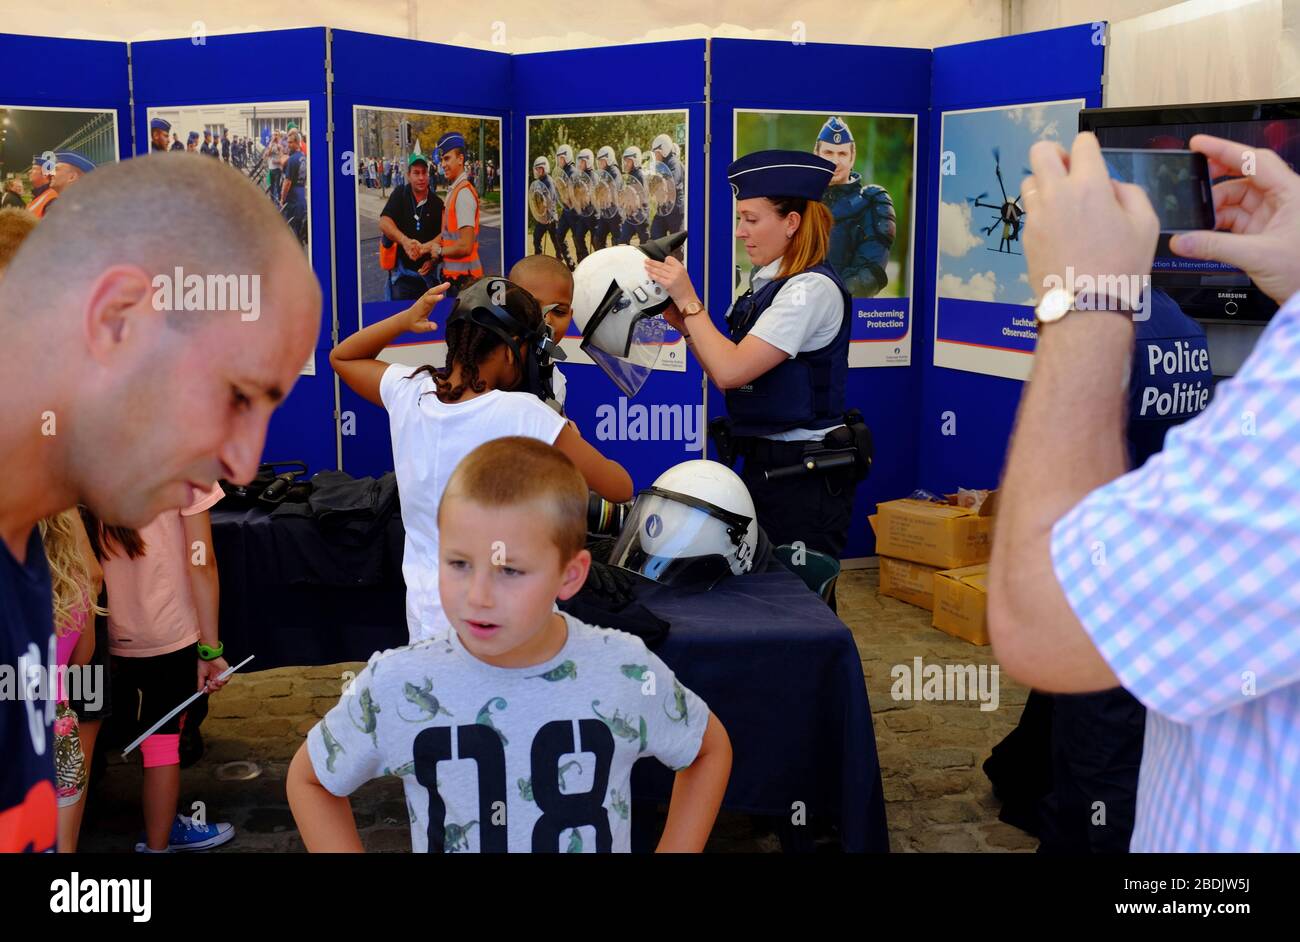 Police and law enforcement show as a part of Belgian National Day celebration with a female police officer help children trying out police helmet in the background.Brussels.Belgium Stock Photo